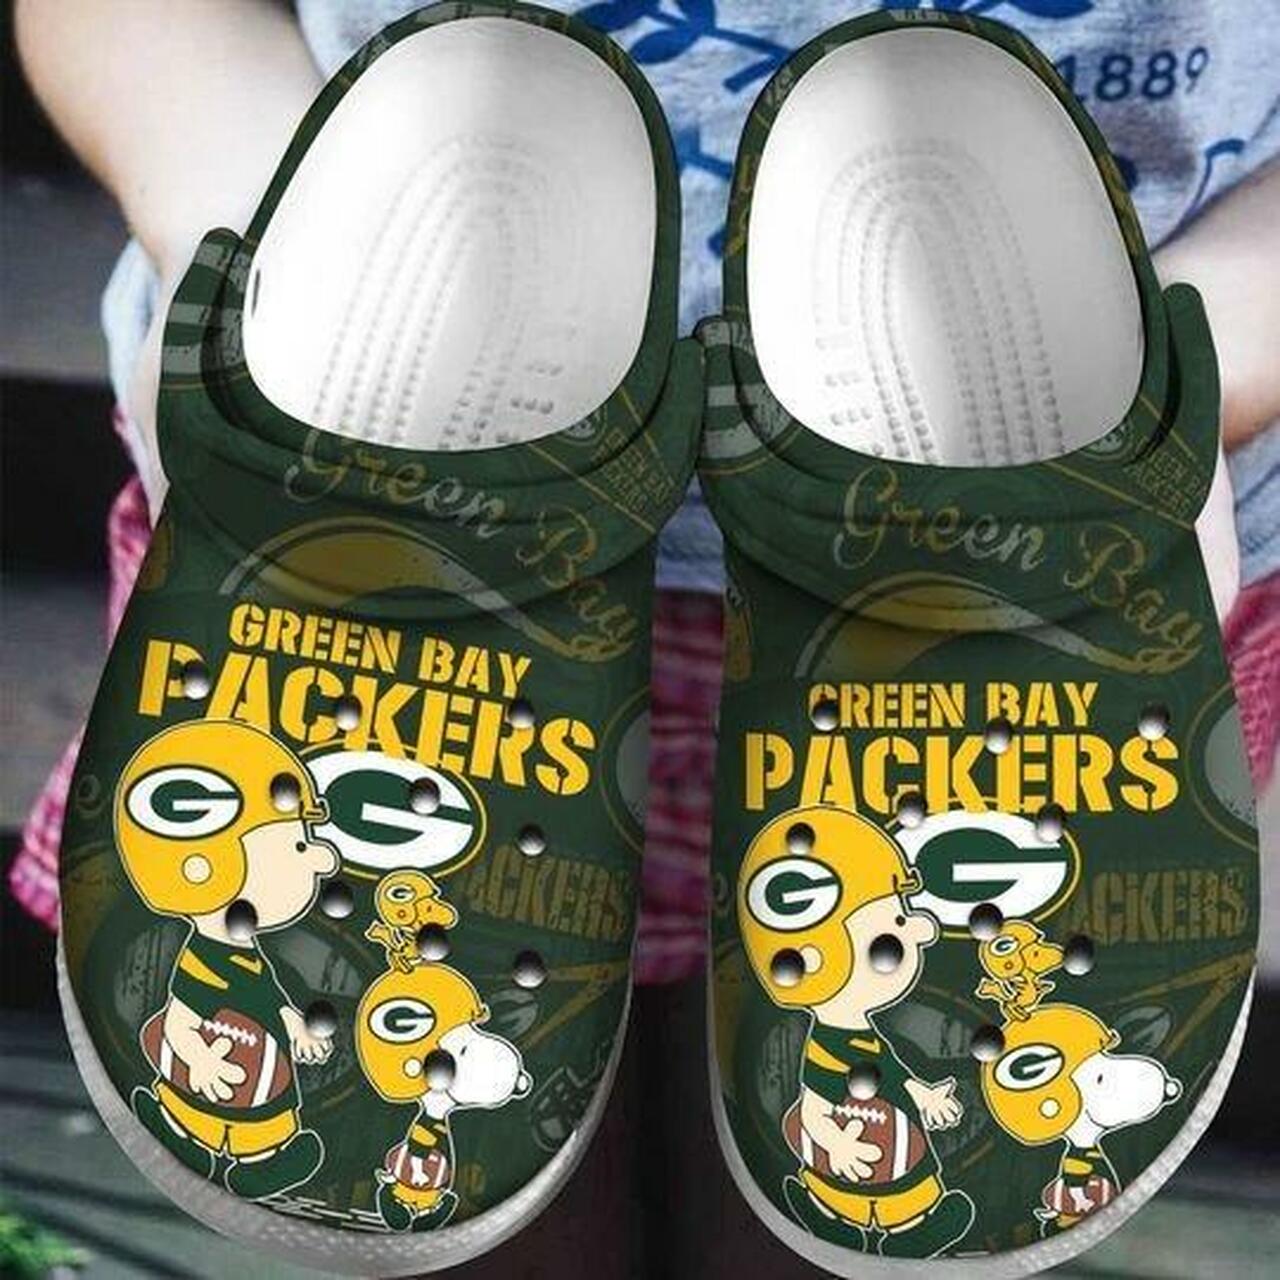 Green Bay Packers Nfl Football Personalized Crocs Crocband Clog Unisex ...